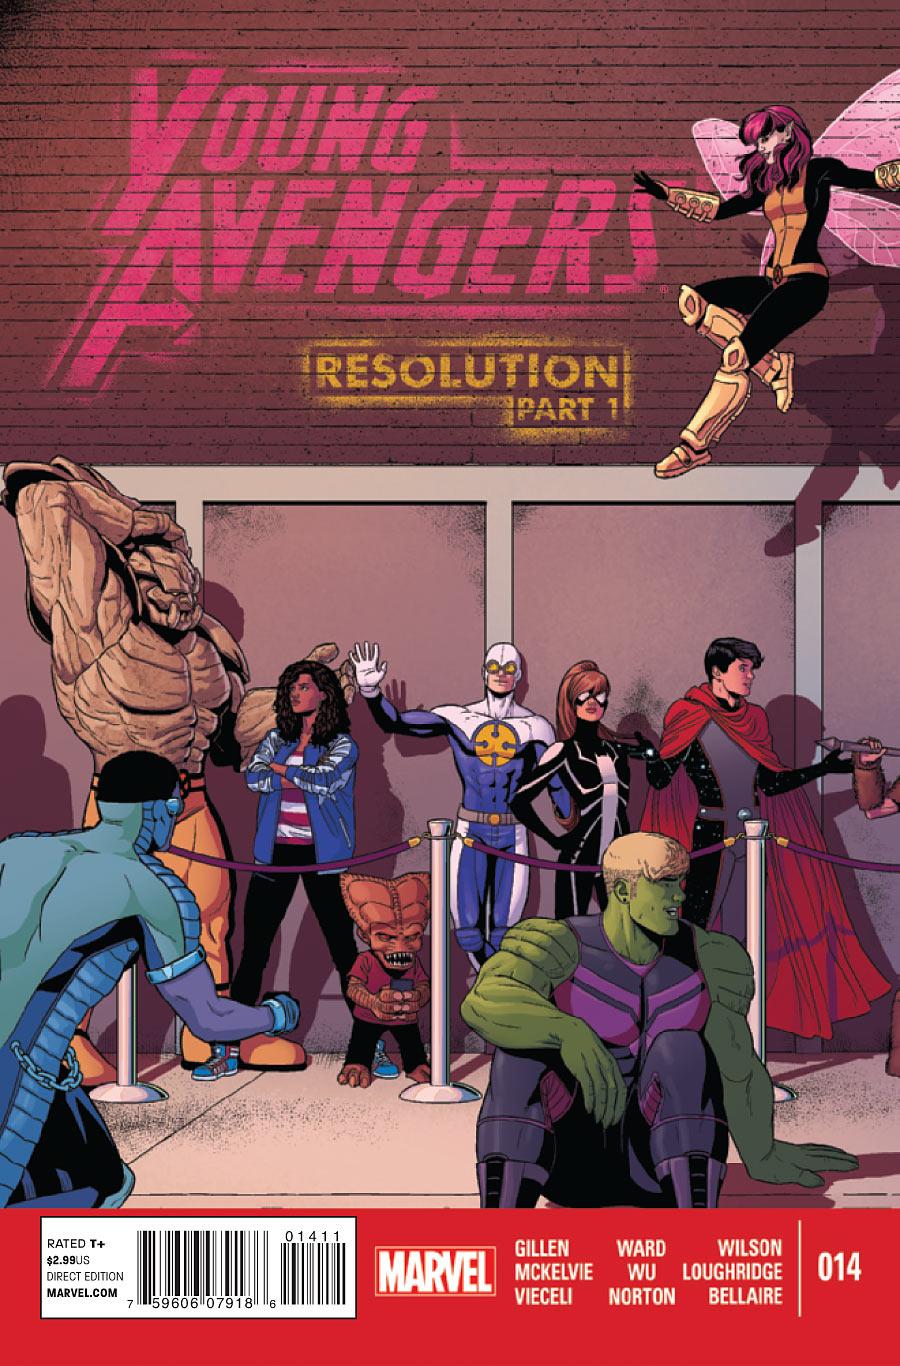 Young Avengers Vol. 2 #14